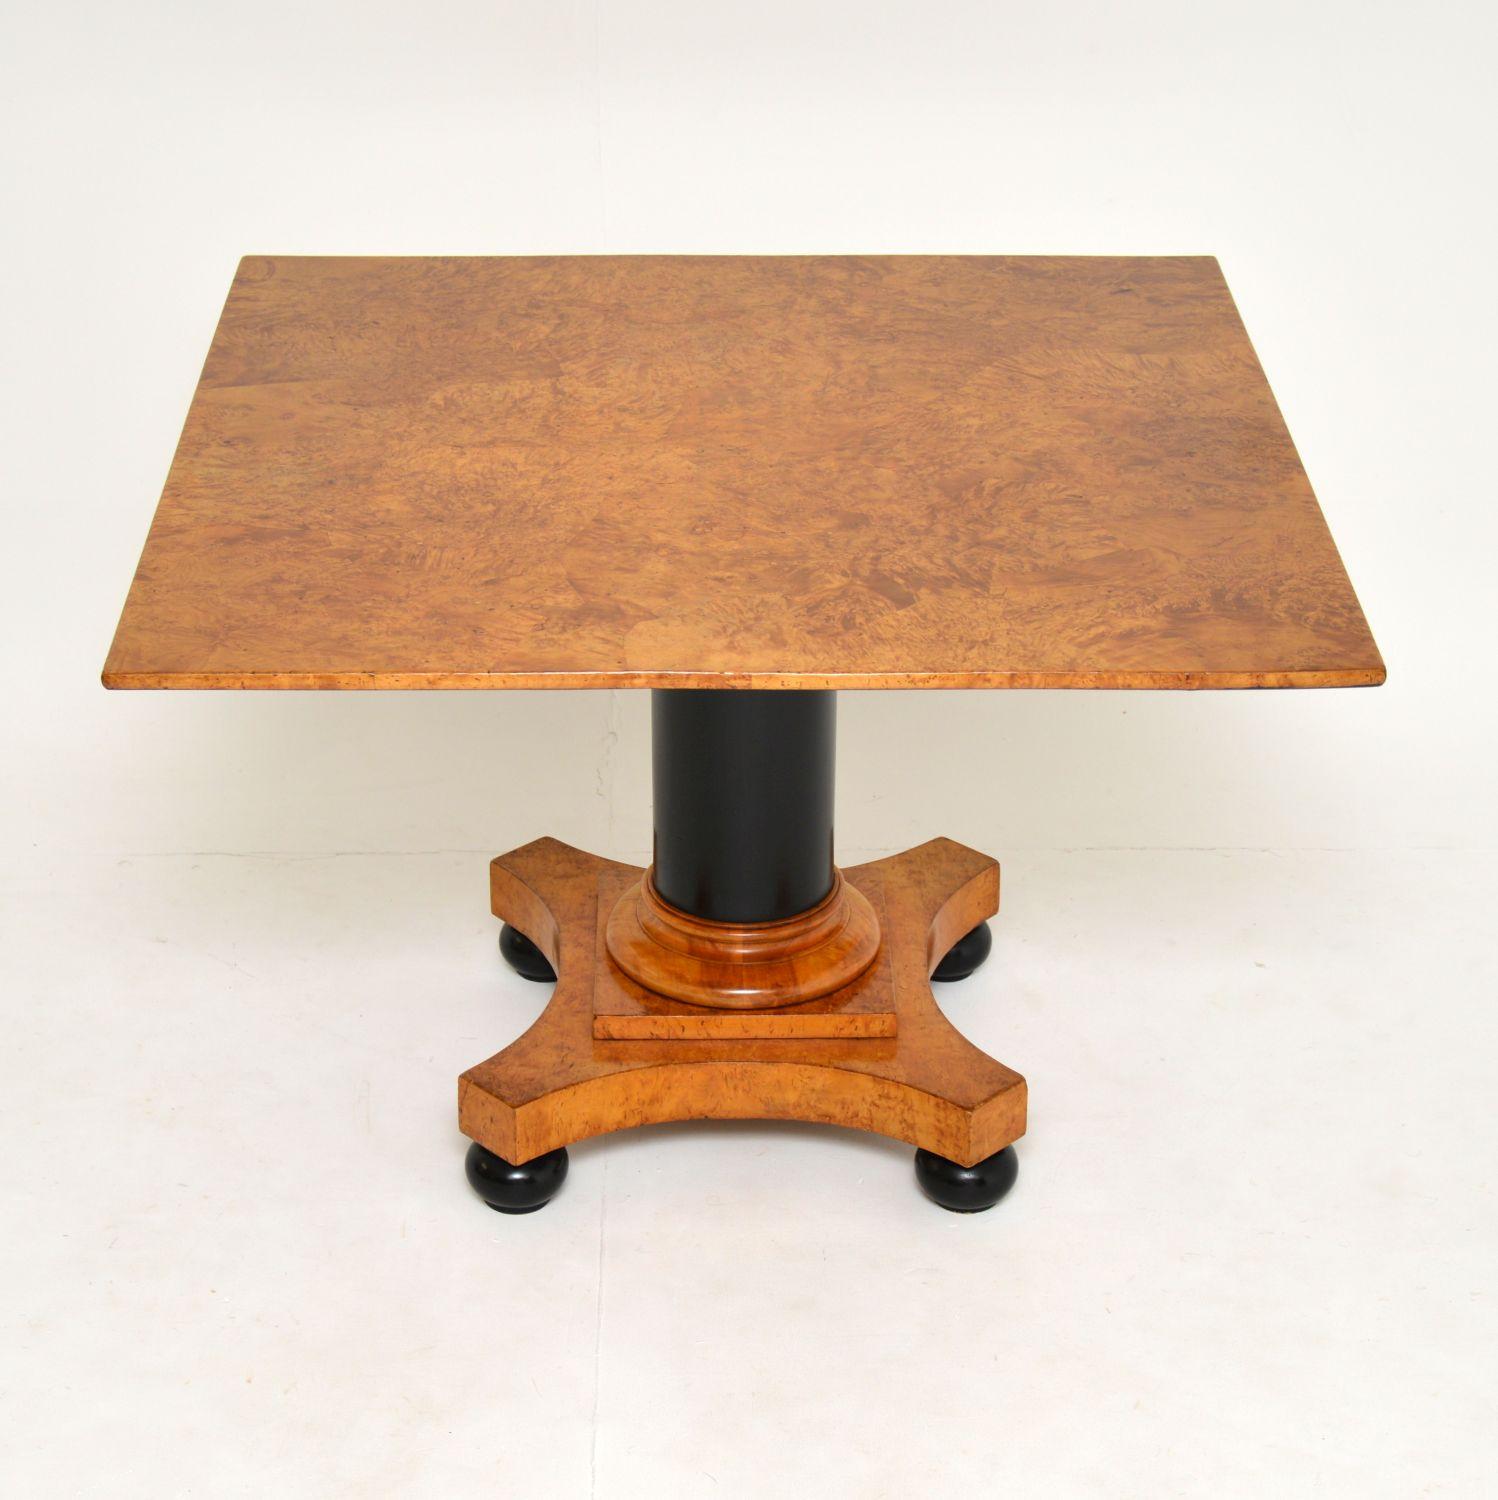 A stunning antique coffee / occasional table, this was made in Sweden and dates from around the 1840’s period. It is beautifully made from burr birch and ebonised wood.

The square top is large and has the most exquisite colour and grain patterns.